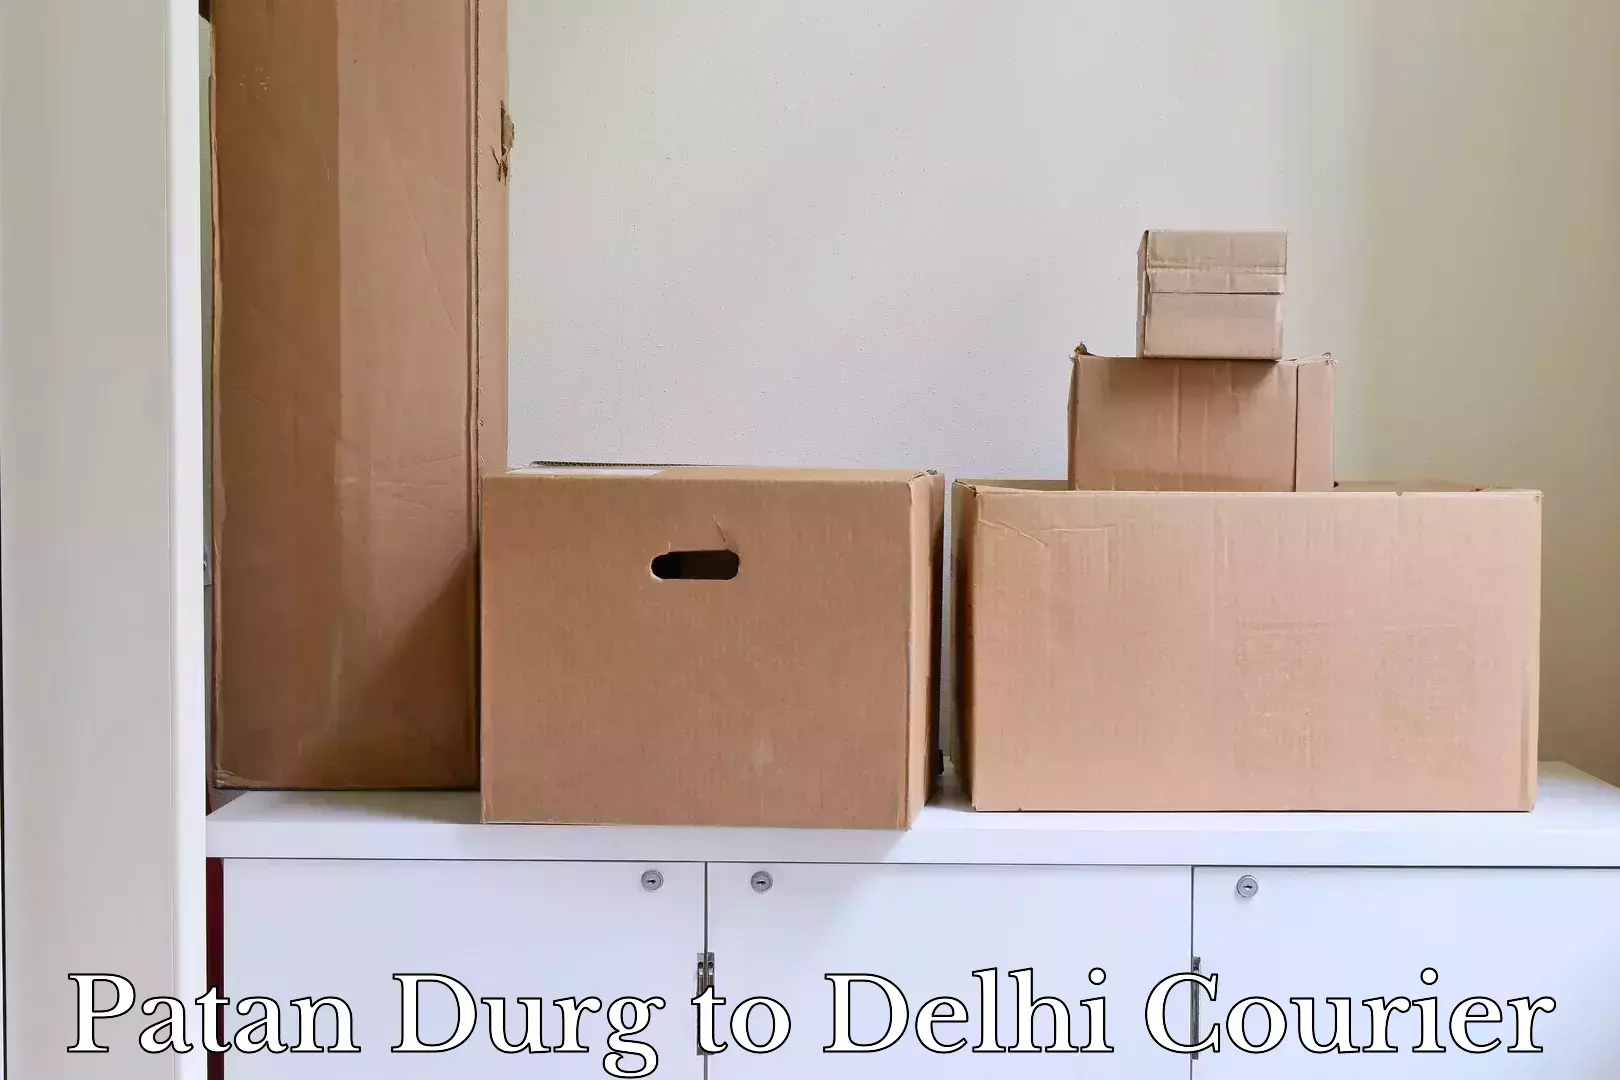 Luggage transport service Patan Durg to East Delhi